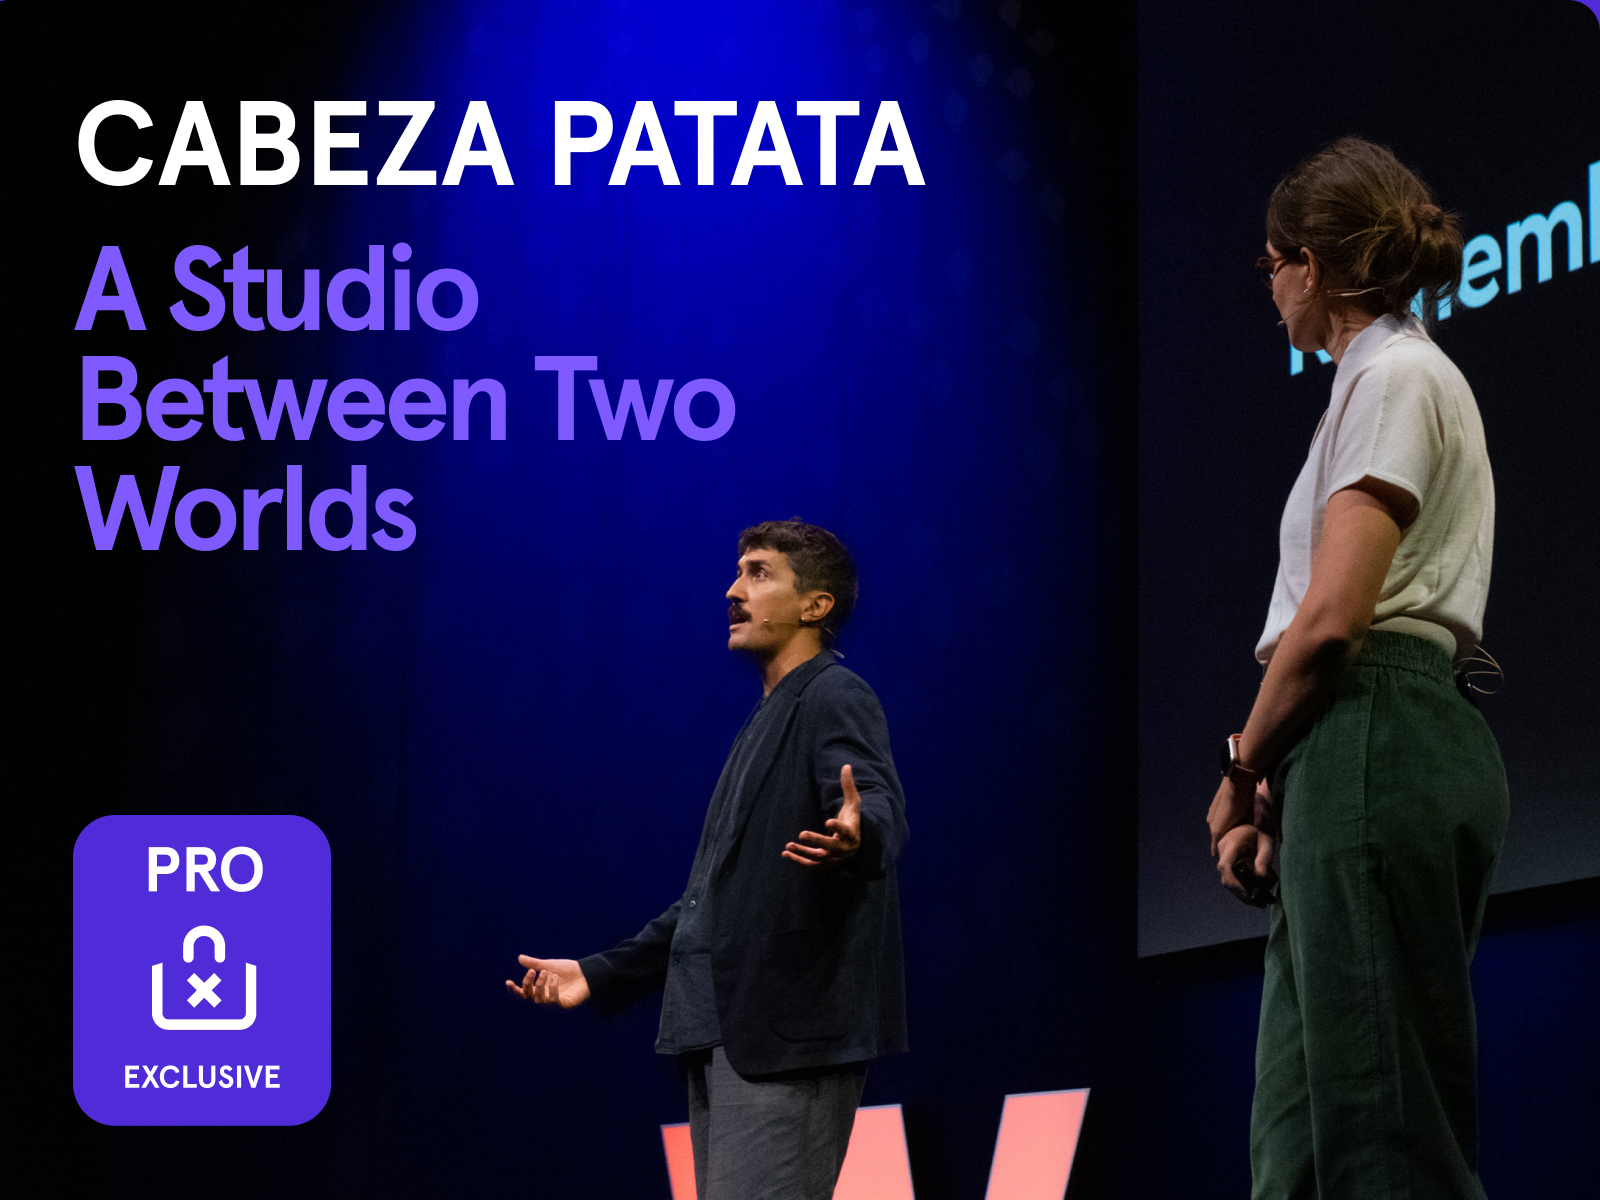 New PRO Content available: watch Cabeza Patata's new talk from Awwwards Conference Amsterdam